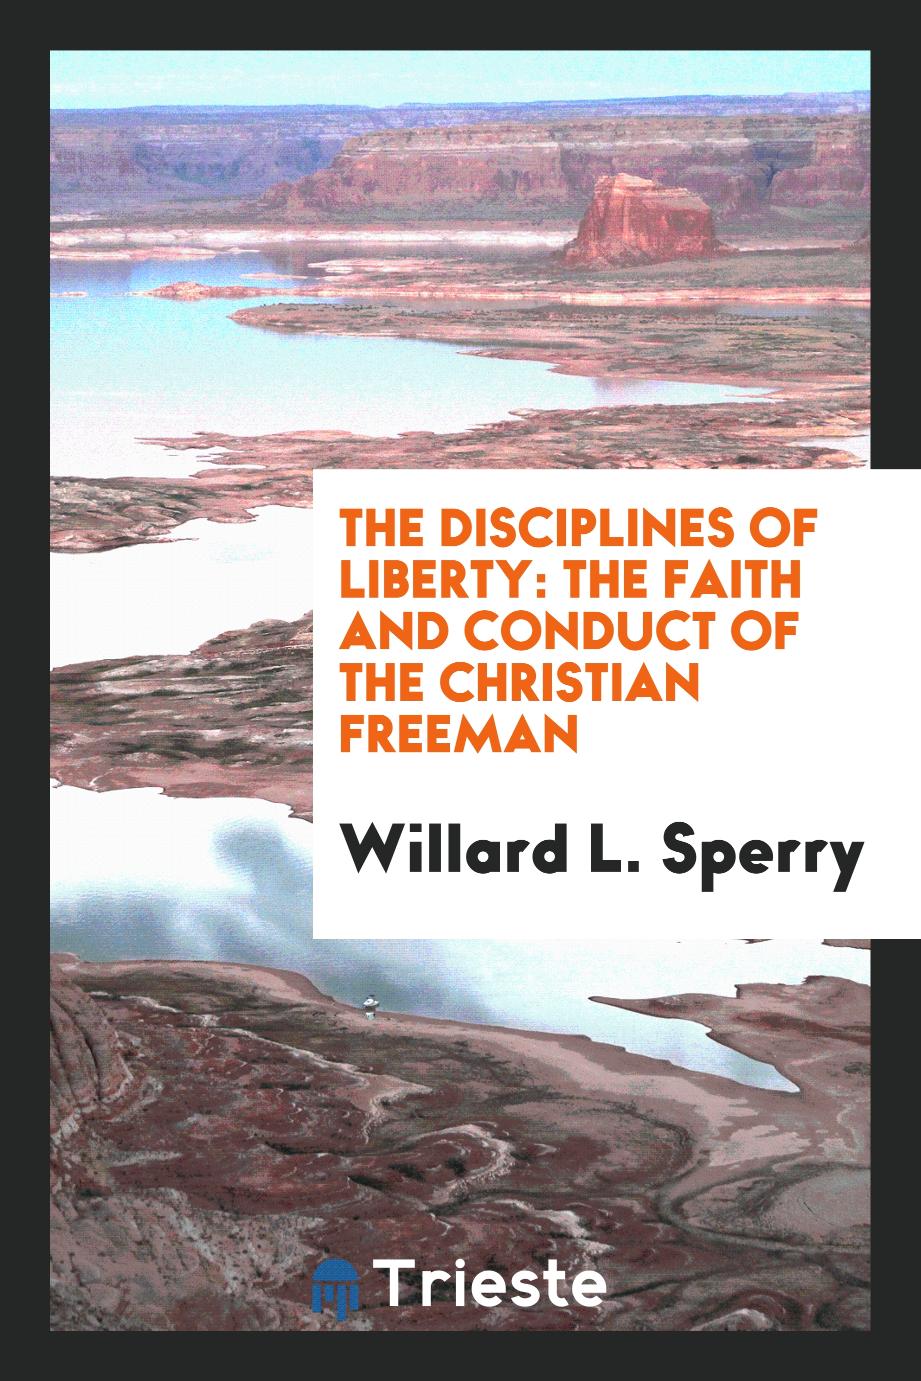 The Disciplines of Liberty: The Faith and Conduct of the Christian Freeman